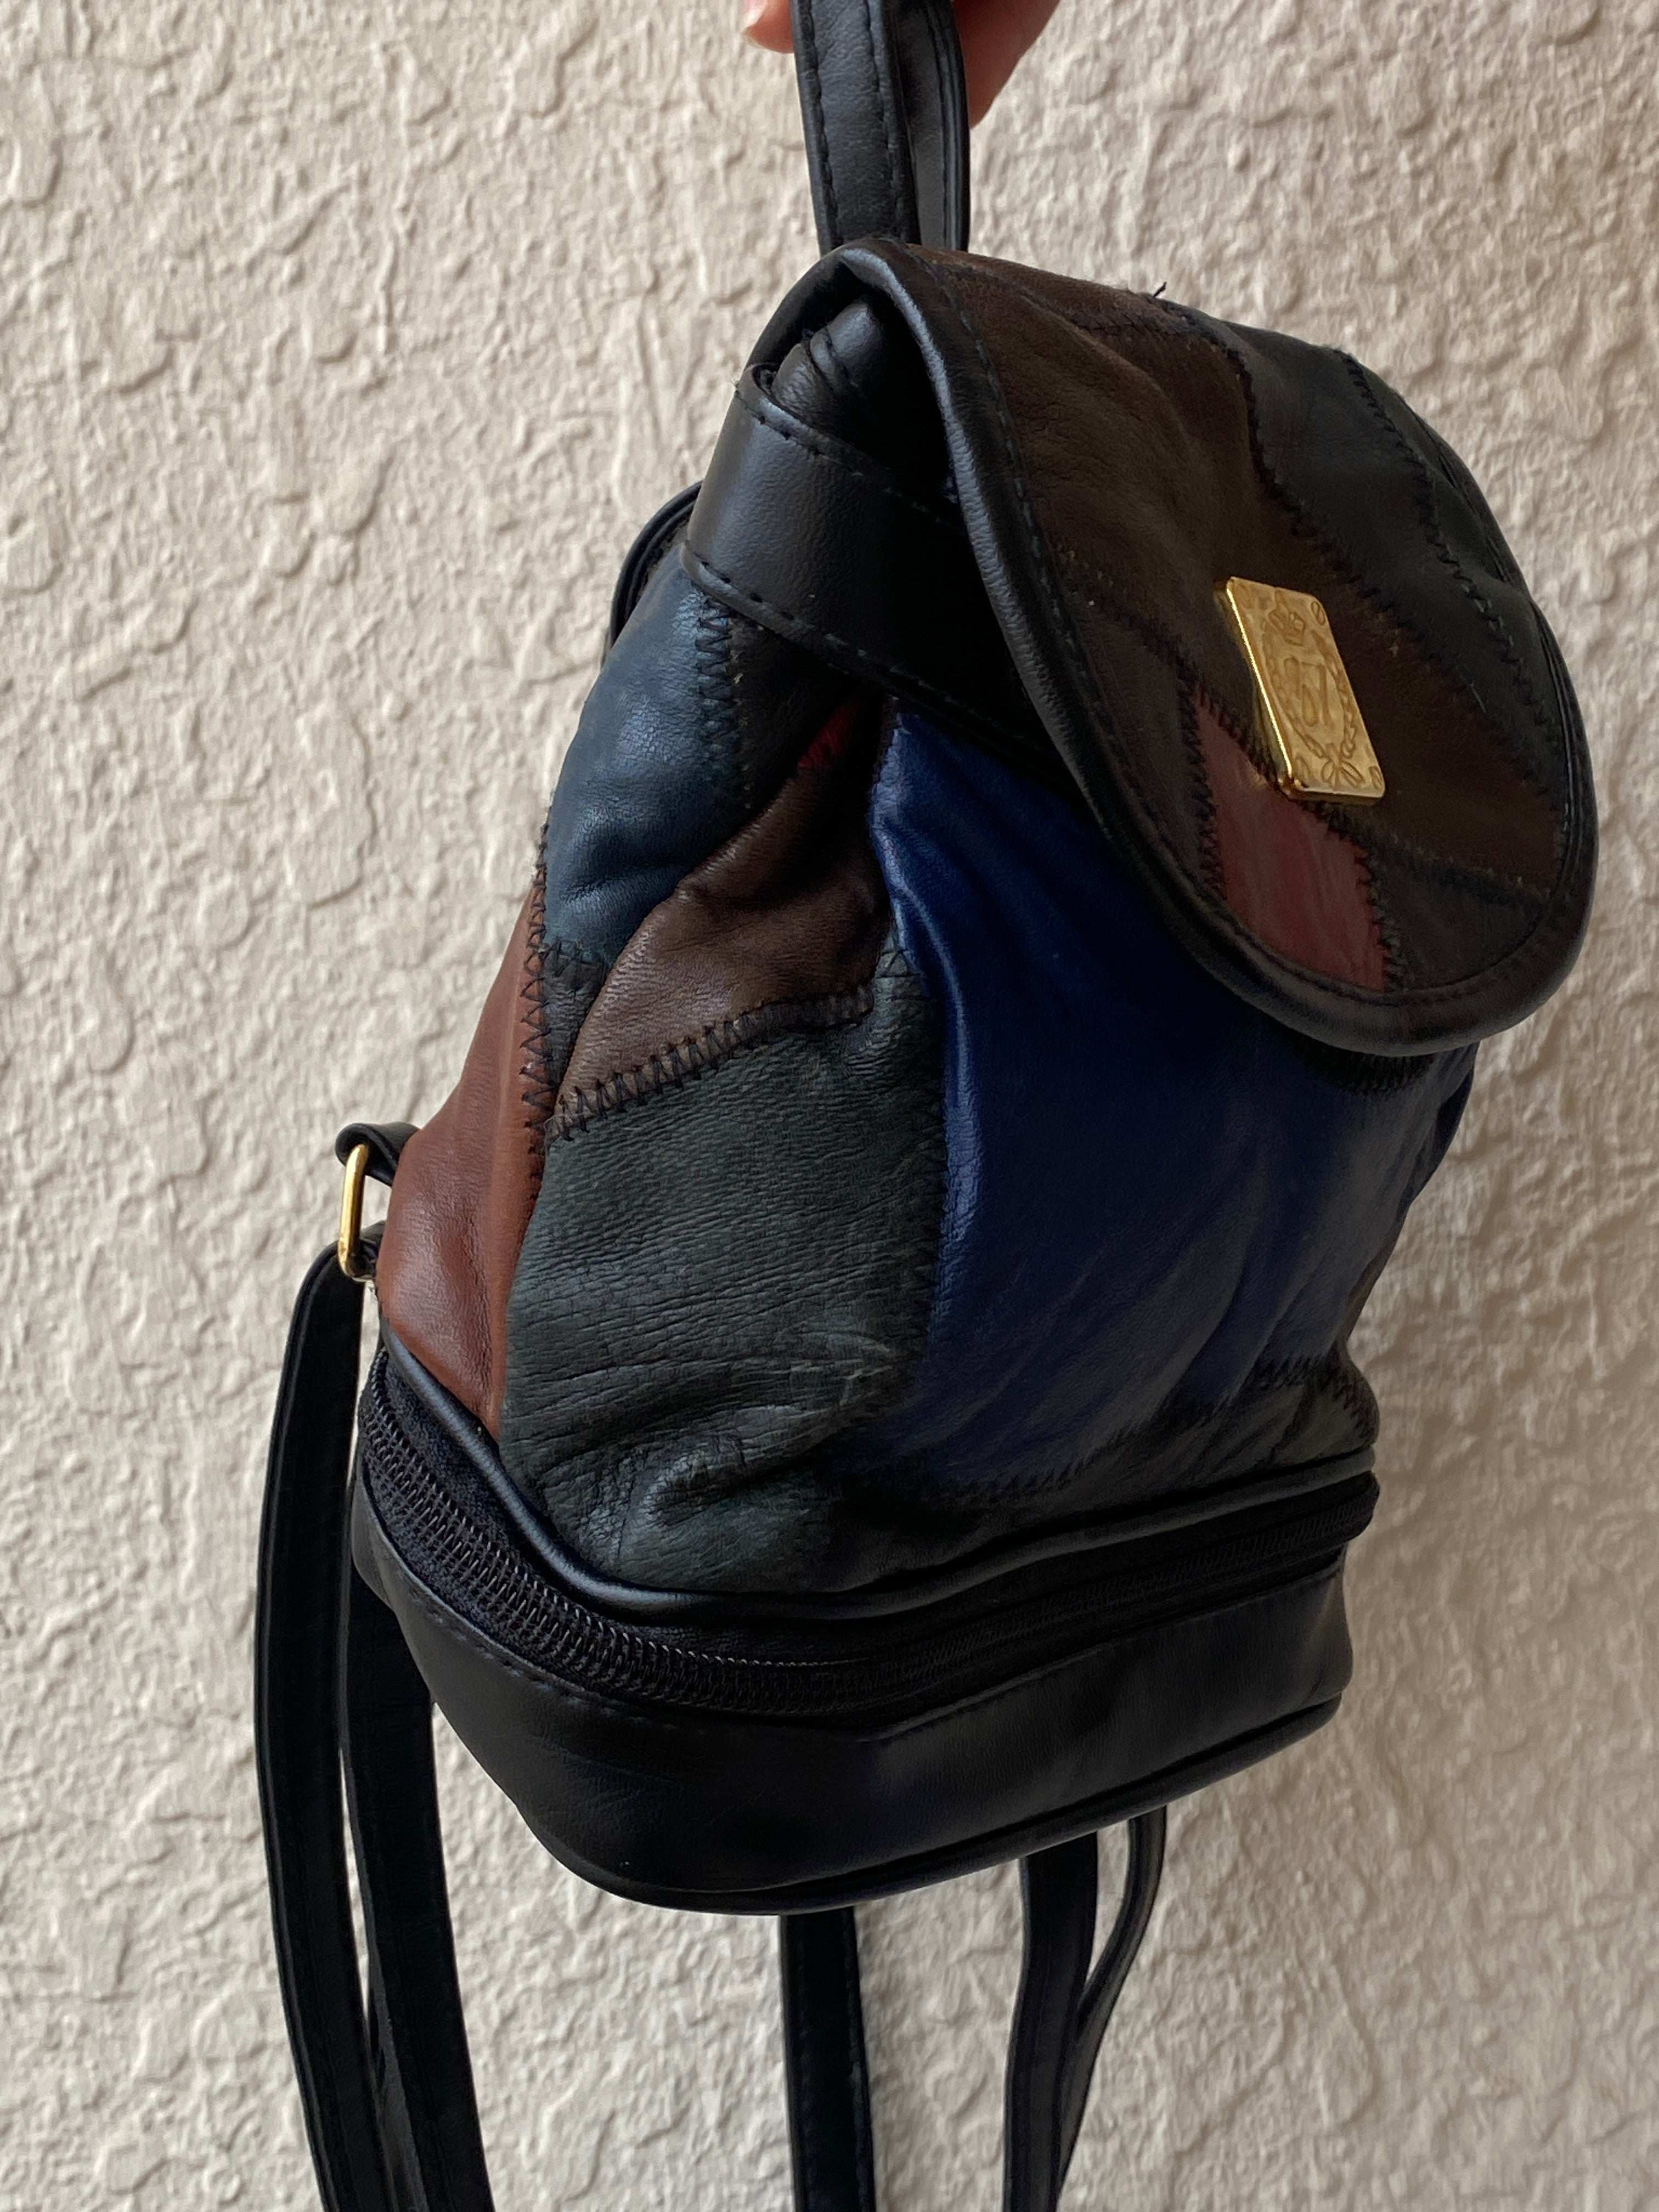 Unique Vintage Genuine Italian Leather Mini Backpack - Balagan Vintage Bags 80s, 90s, bag, NEW IN